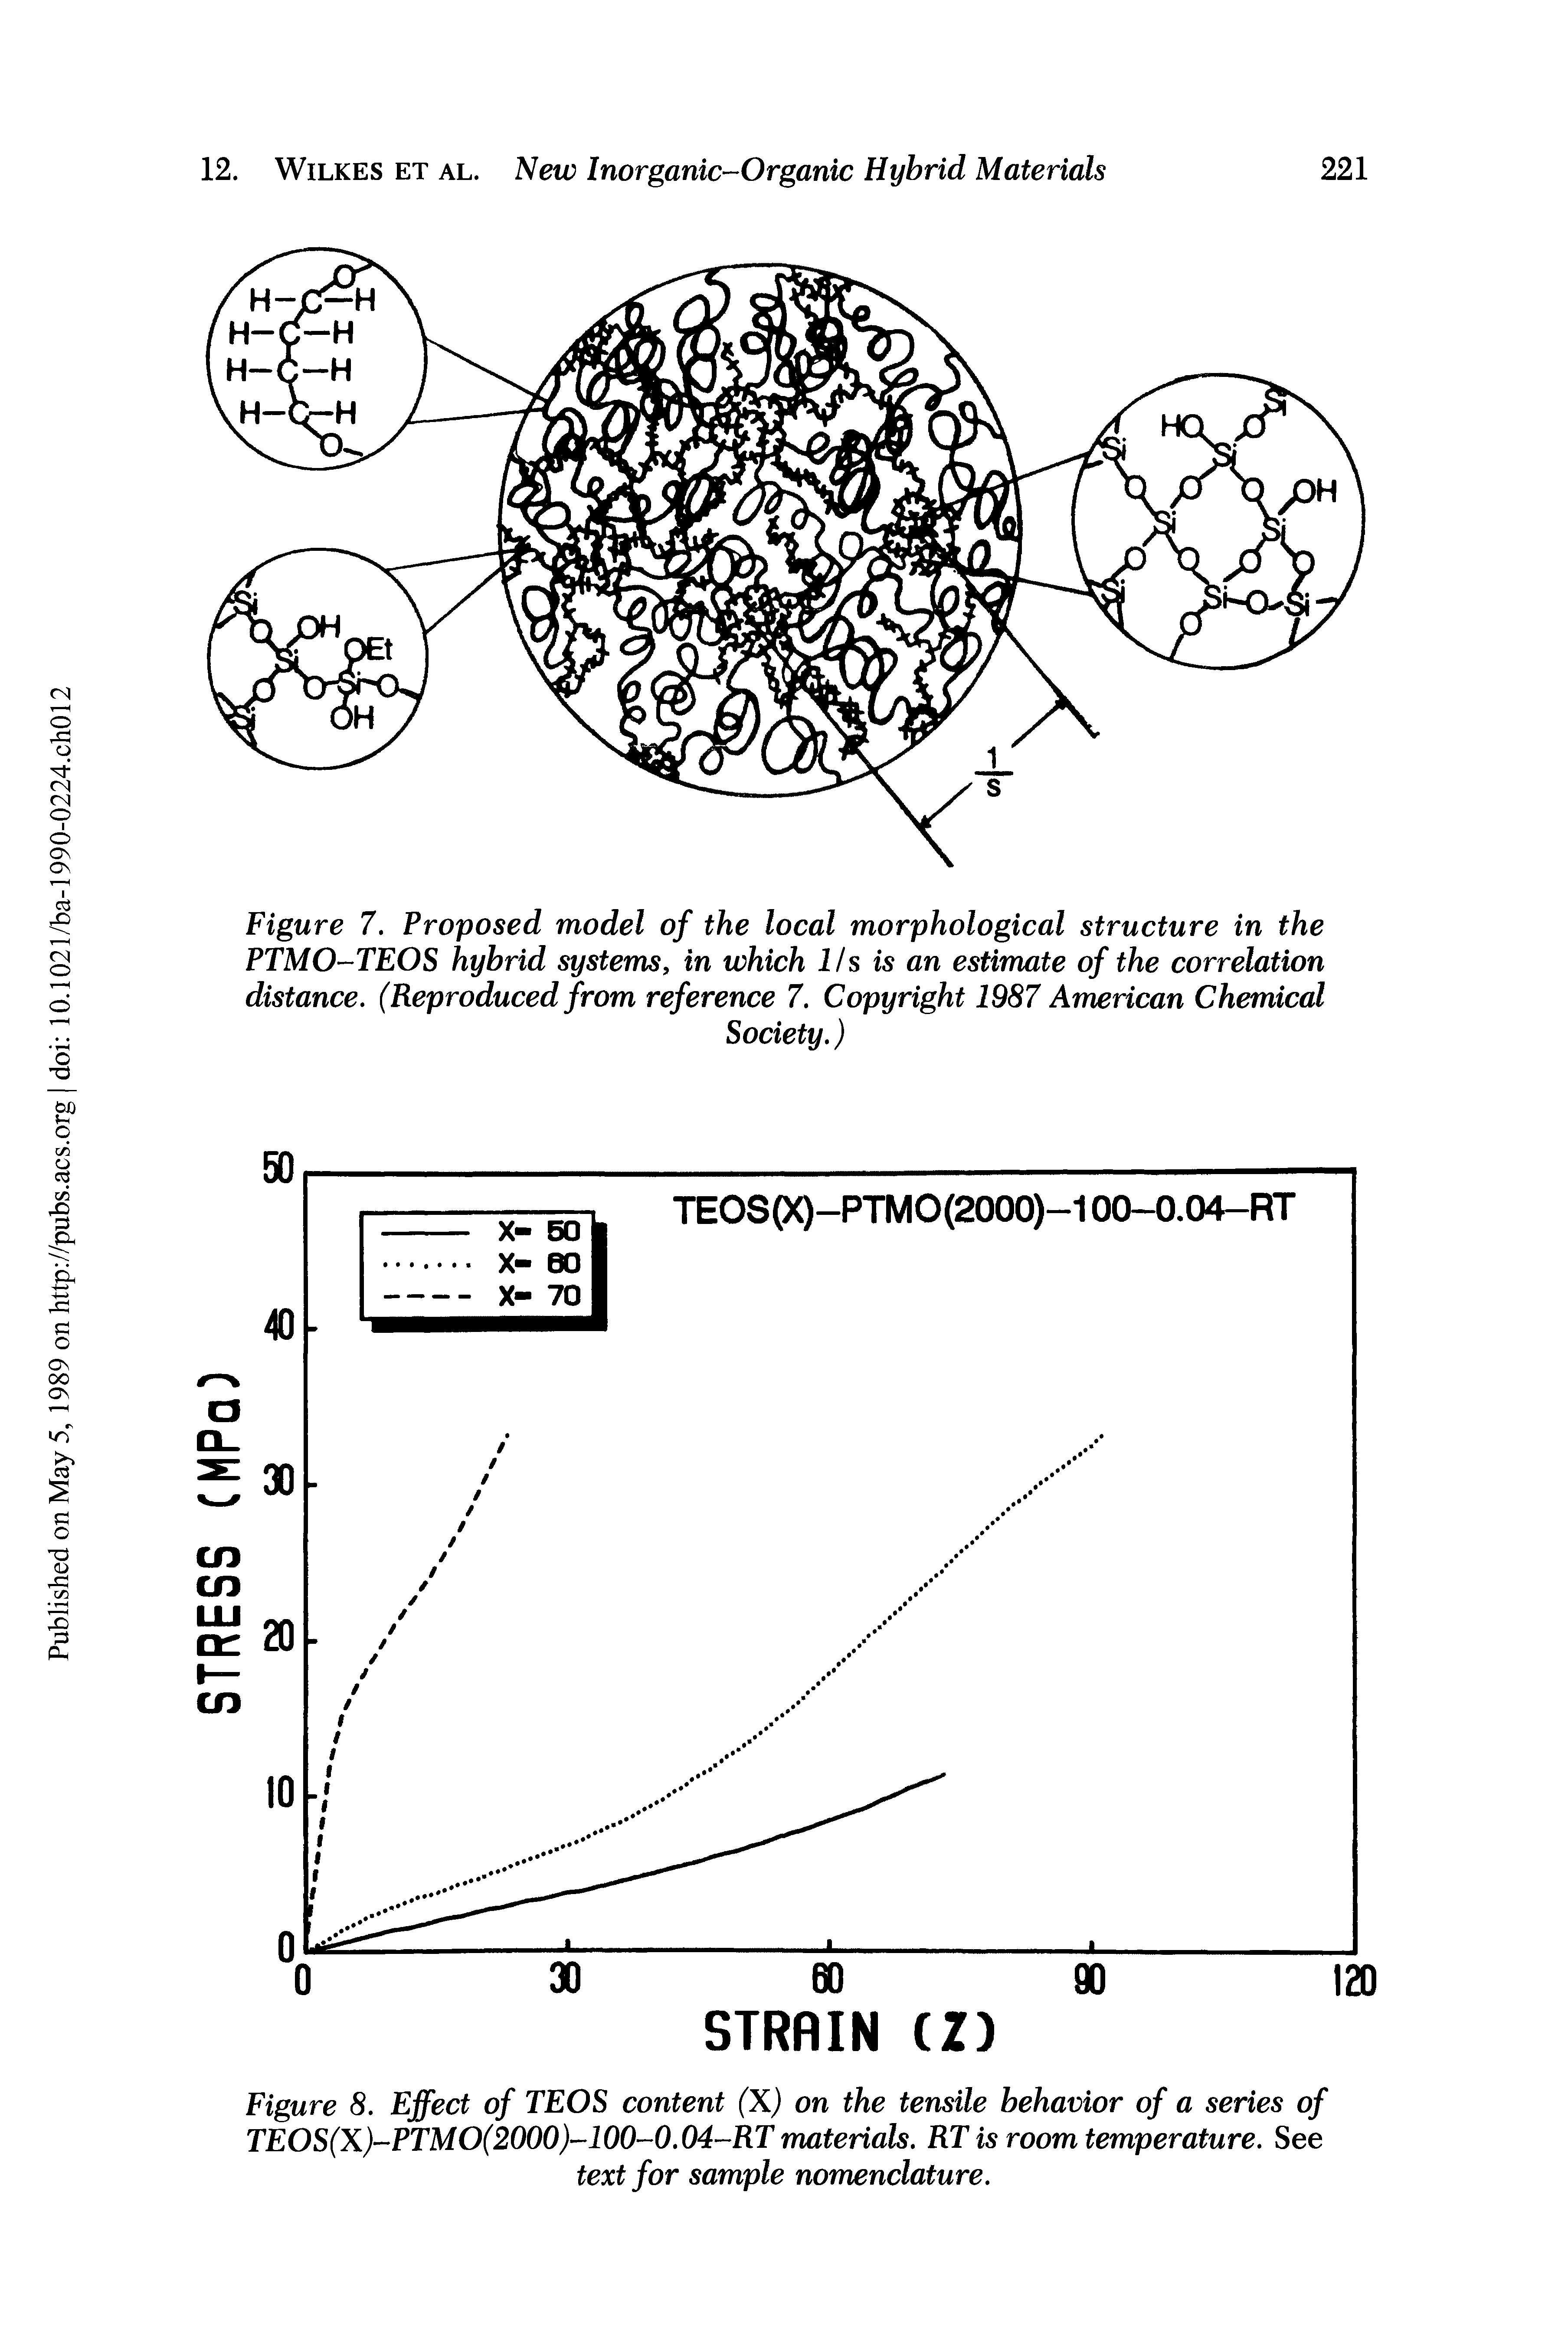 Figure 8. Effect of TEOS content (Xj on the tensile behavior of a series of TEOS(X)-PTMO(2000)-100-0.04-RT materials. RT is room temperature. See text for sample nomenclature.